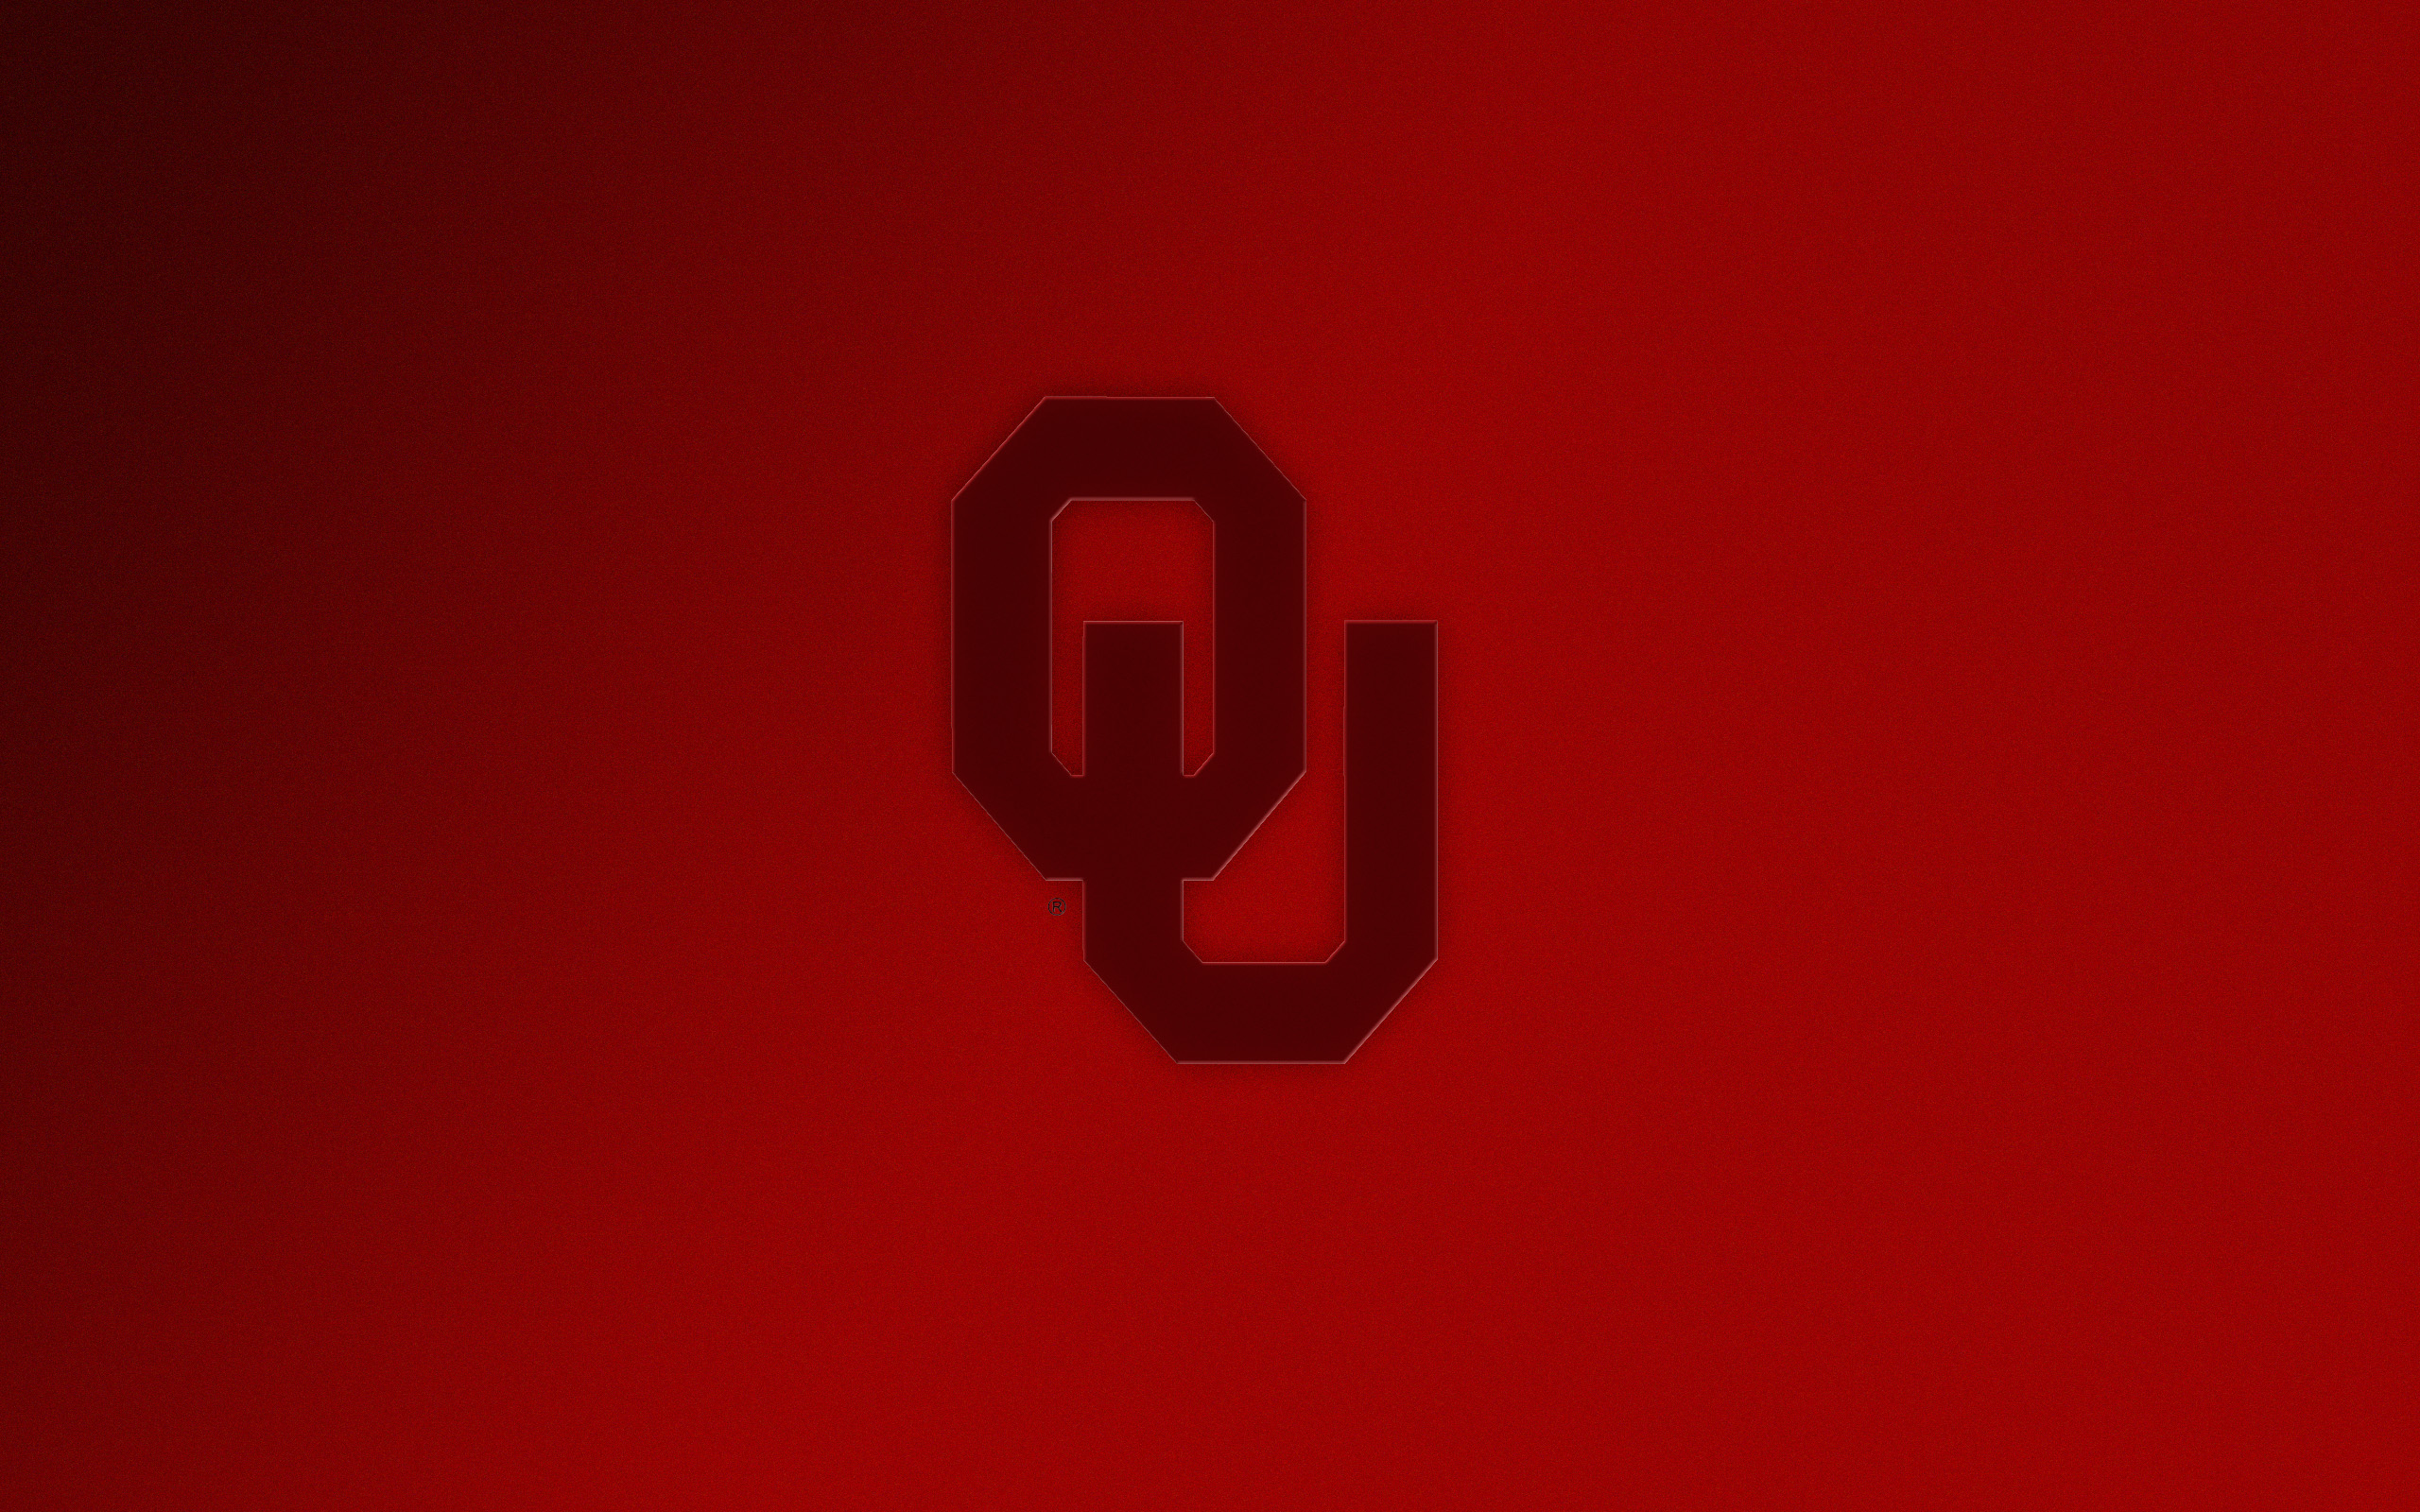  com University of Oklahoma Themed Wallpapers Free for Download